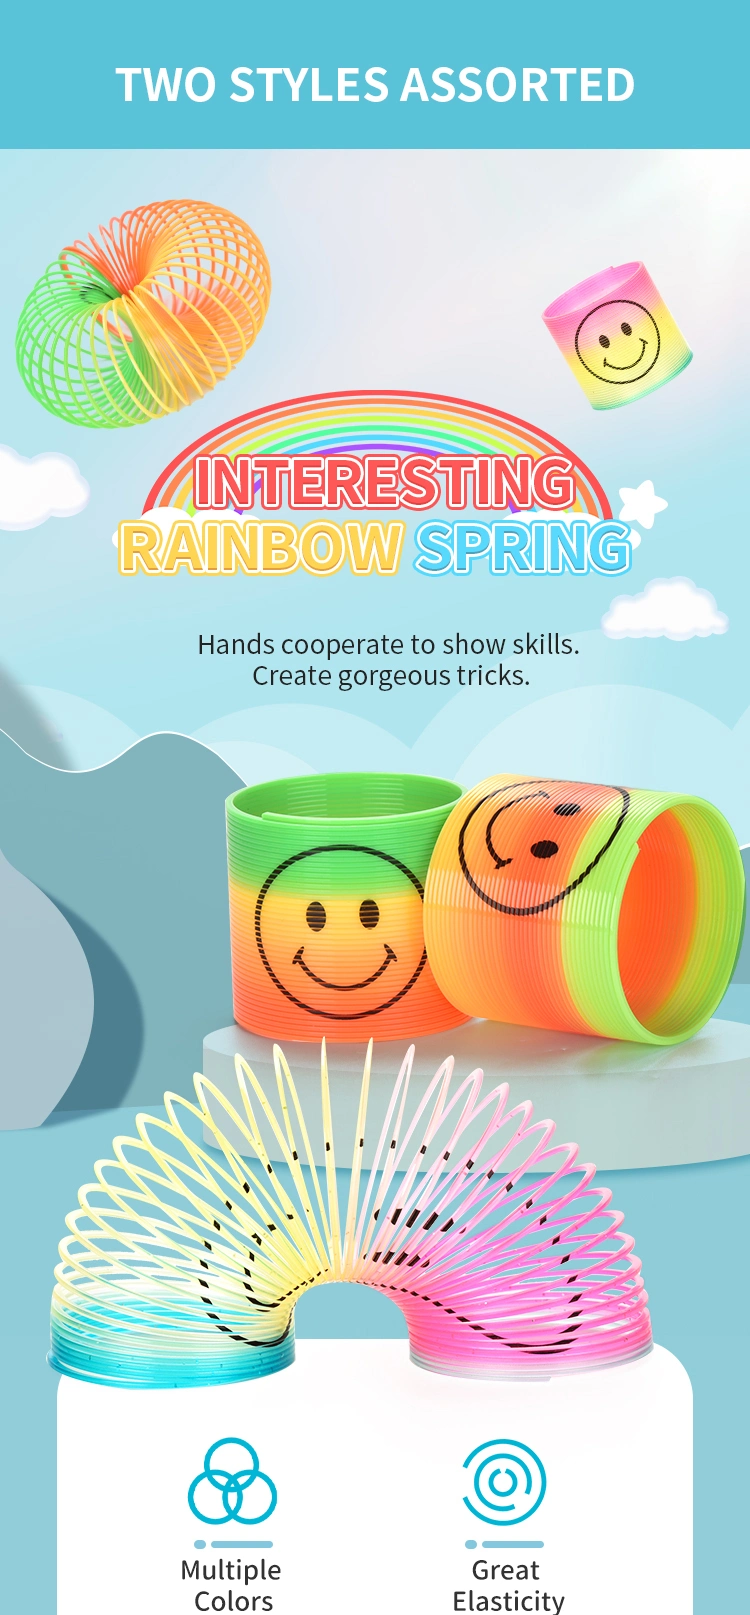 Rainbow Spring Toy Assortment (Pack of 12) Mini Plastic Coil Spring Toy Bright Colors and Shapes Rainbow Magic Spring for Kids